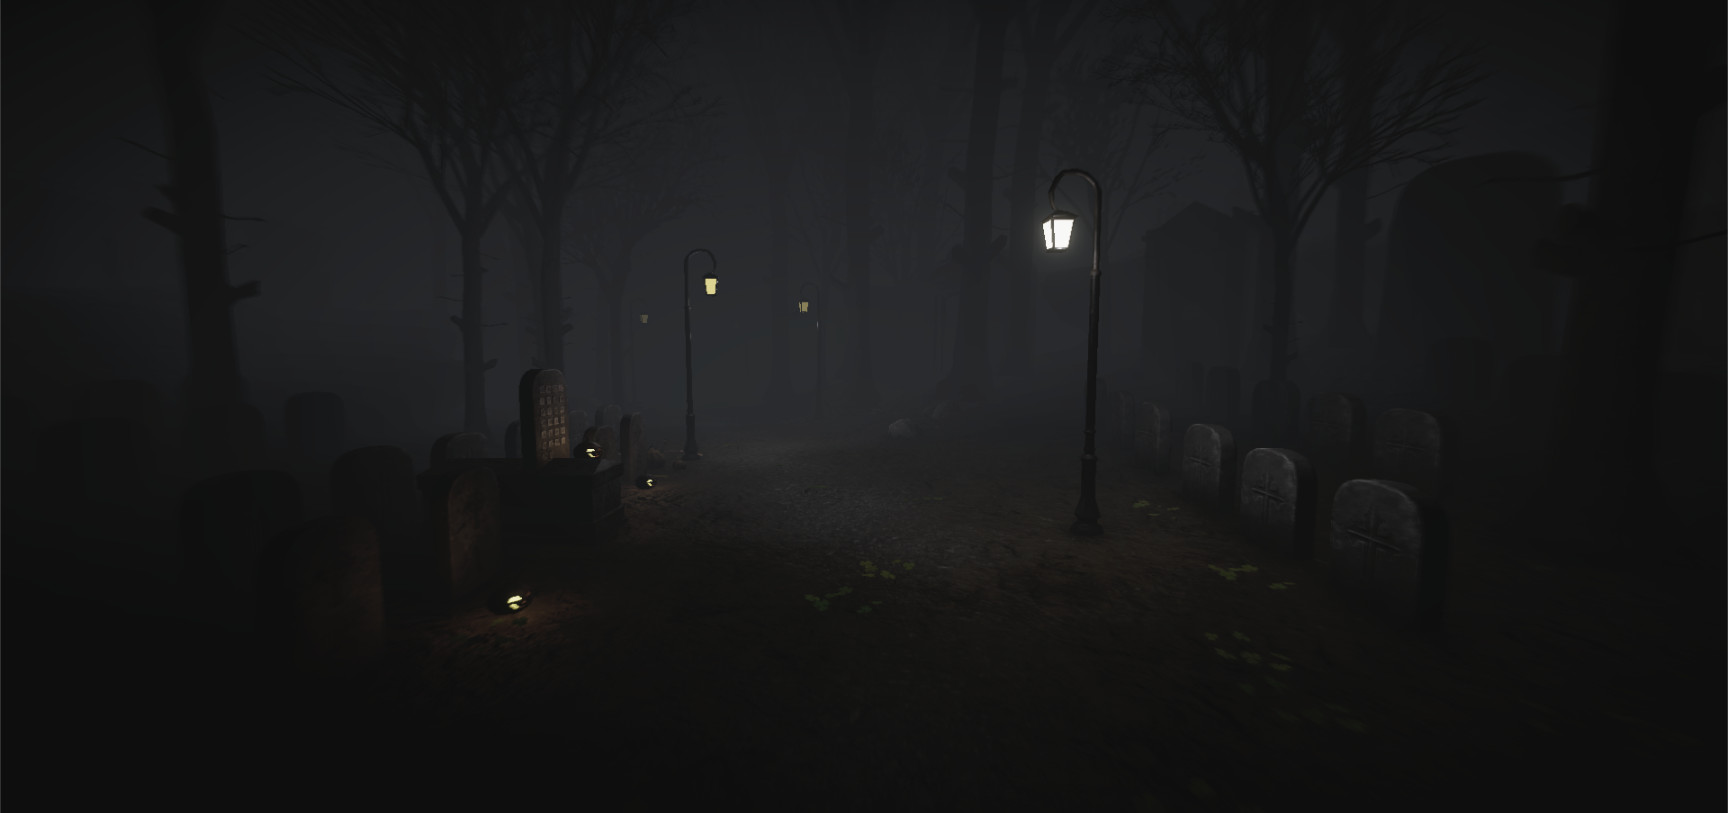 Tales of Escape - Sleepy Hollow VR Featured Screenshot #1